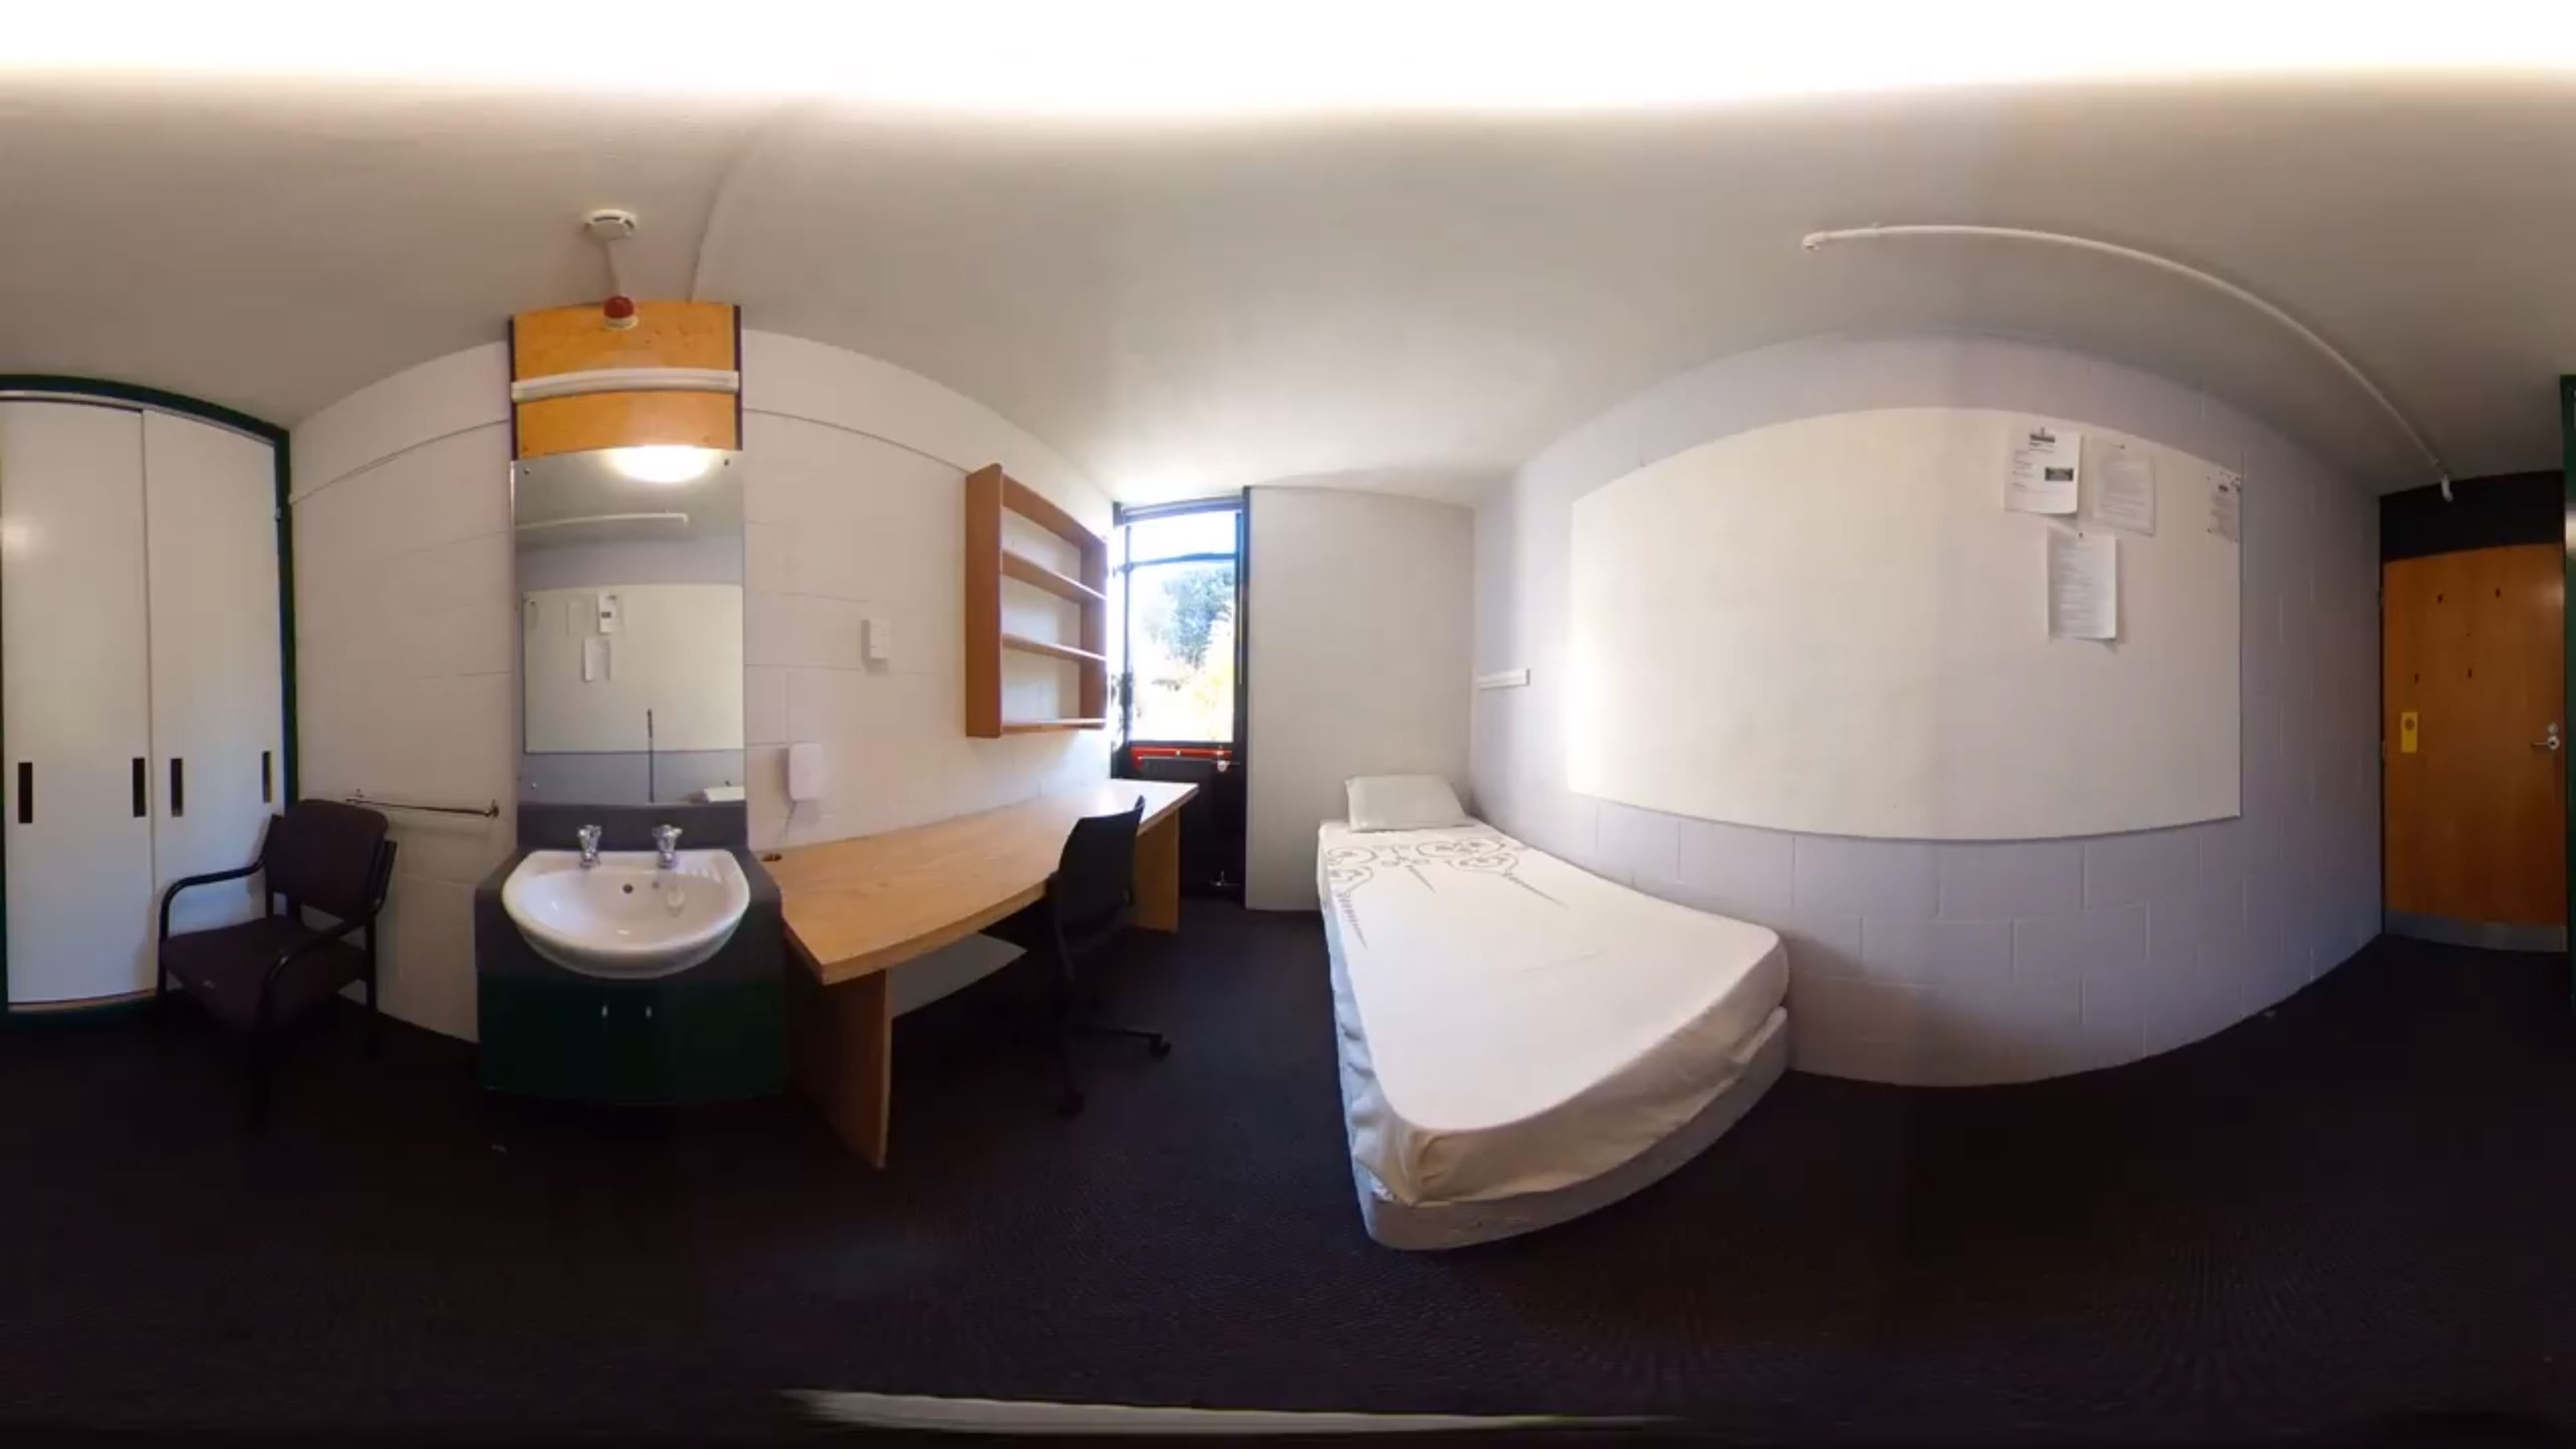 A panoramic view of a bedroom in the James Hutchinson wing with a single bed, a desk, and a sink.